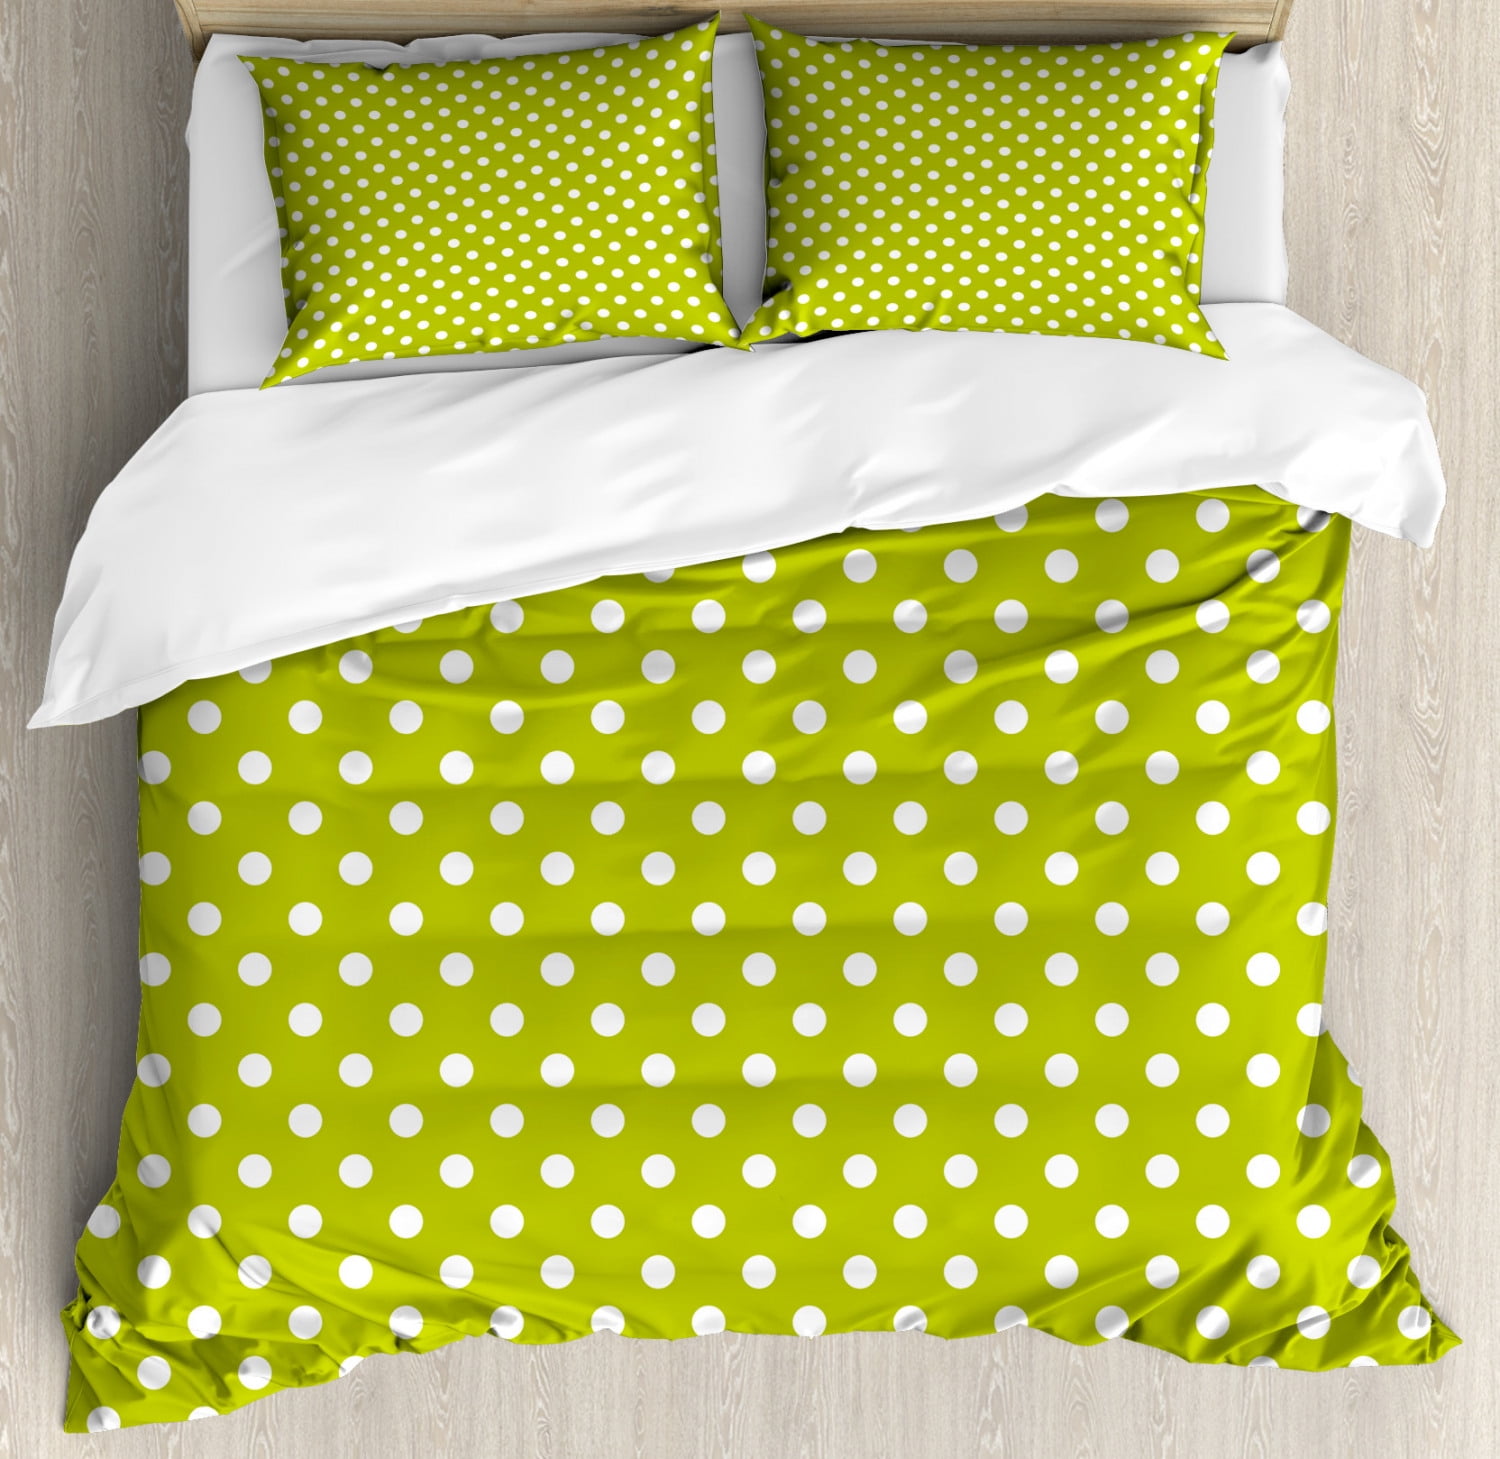 Retro Queen Size Duvet Cover Set, Lime Green And White Duvet Covers